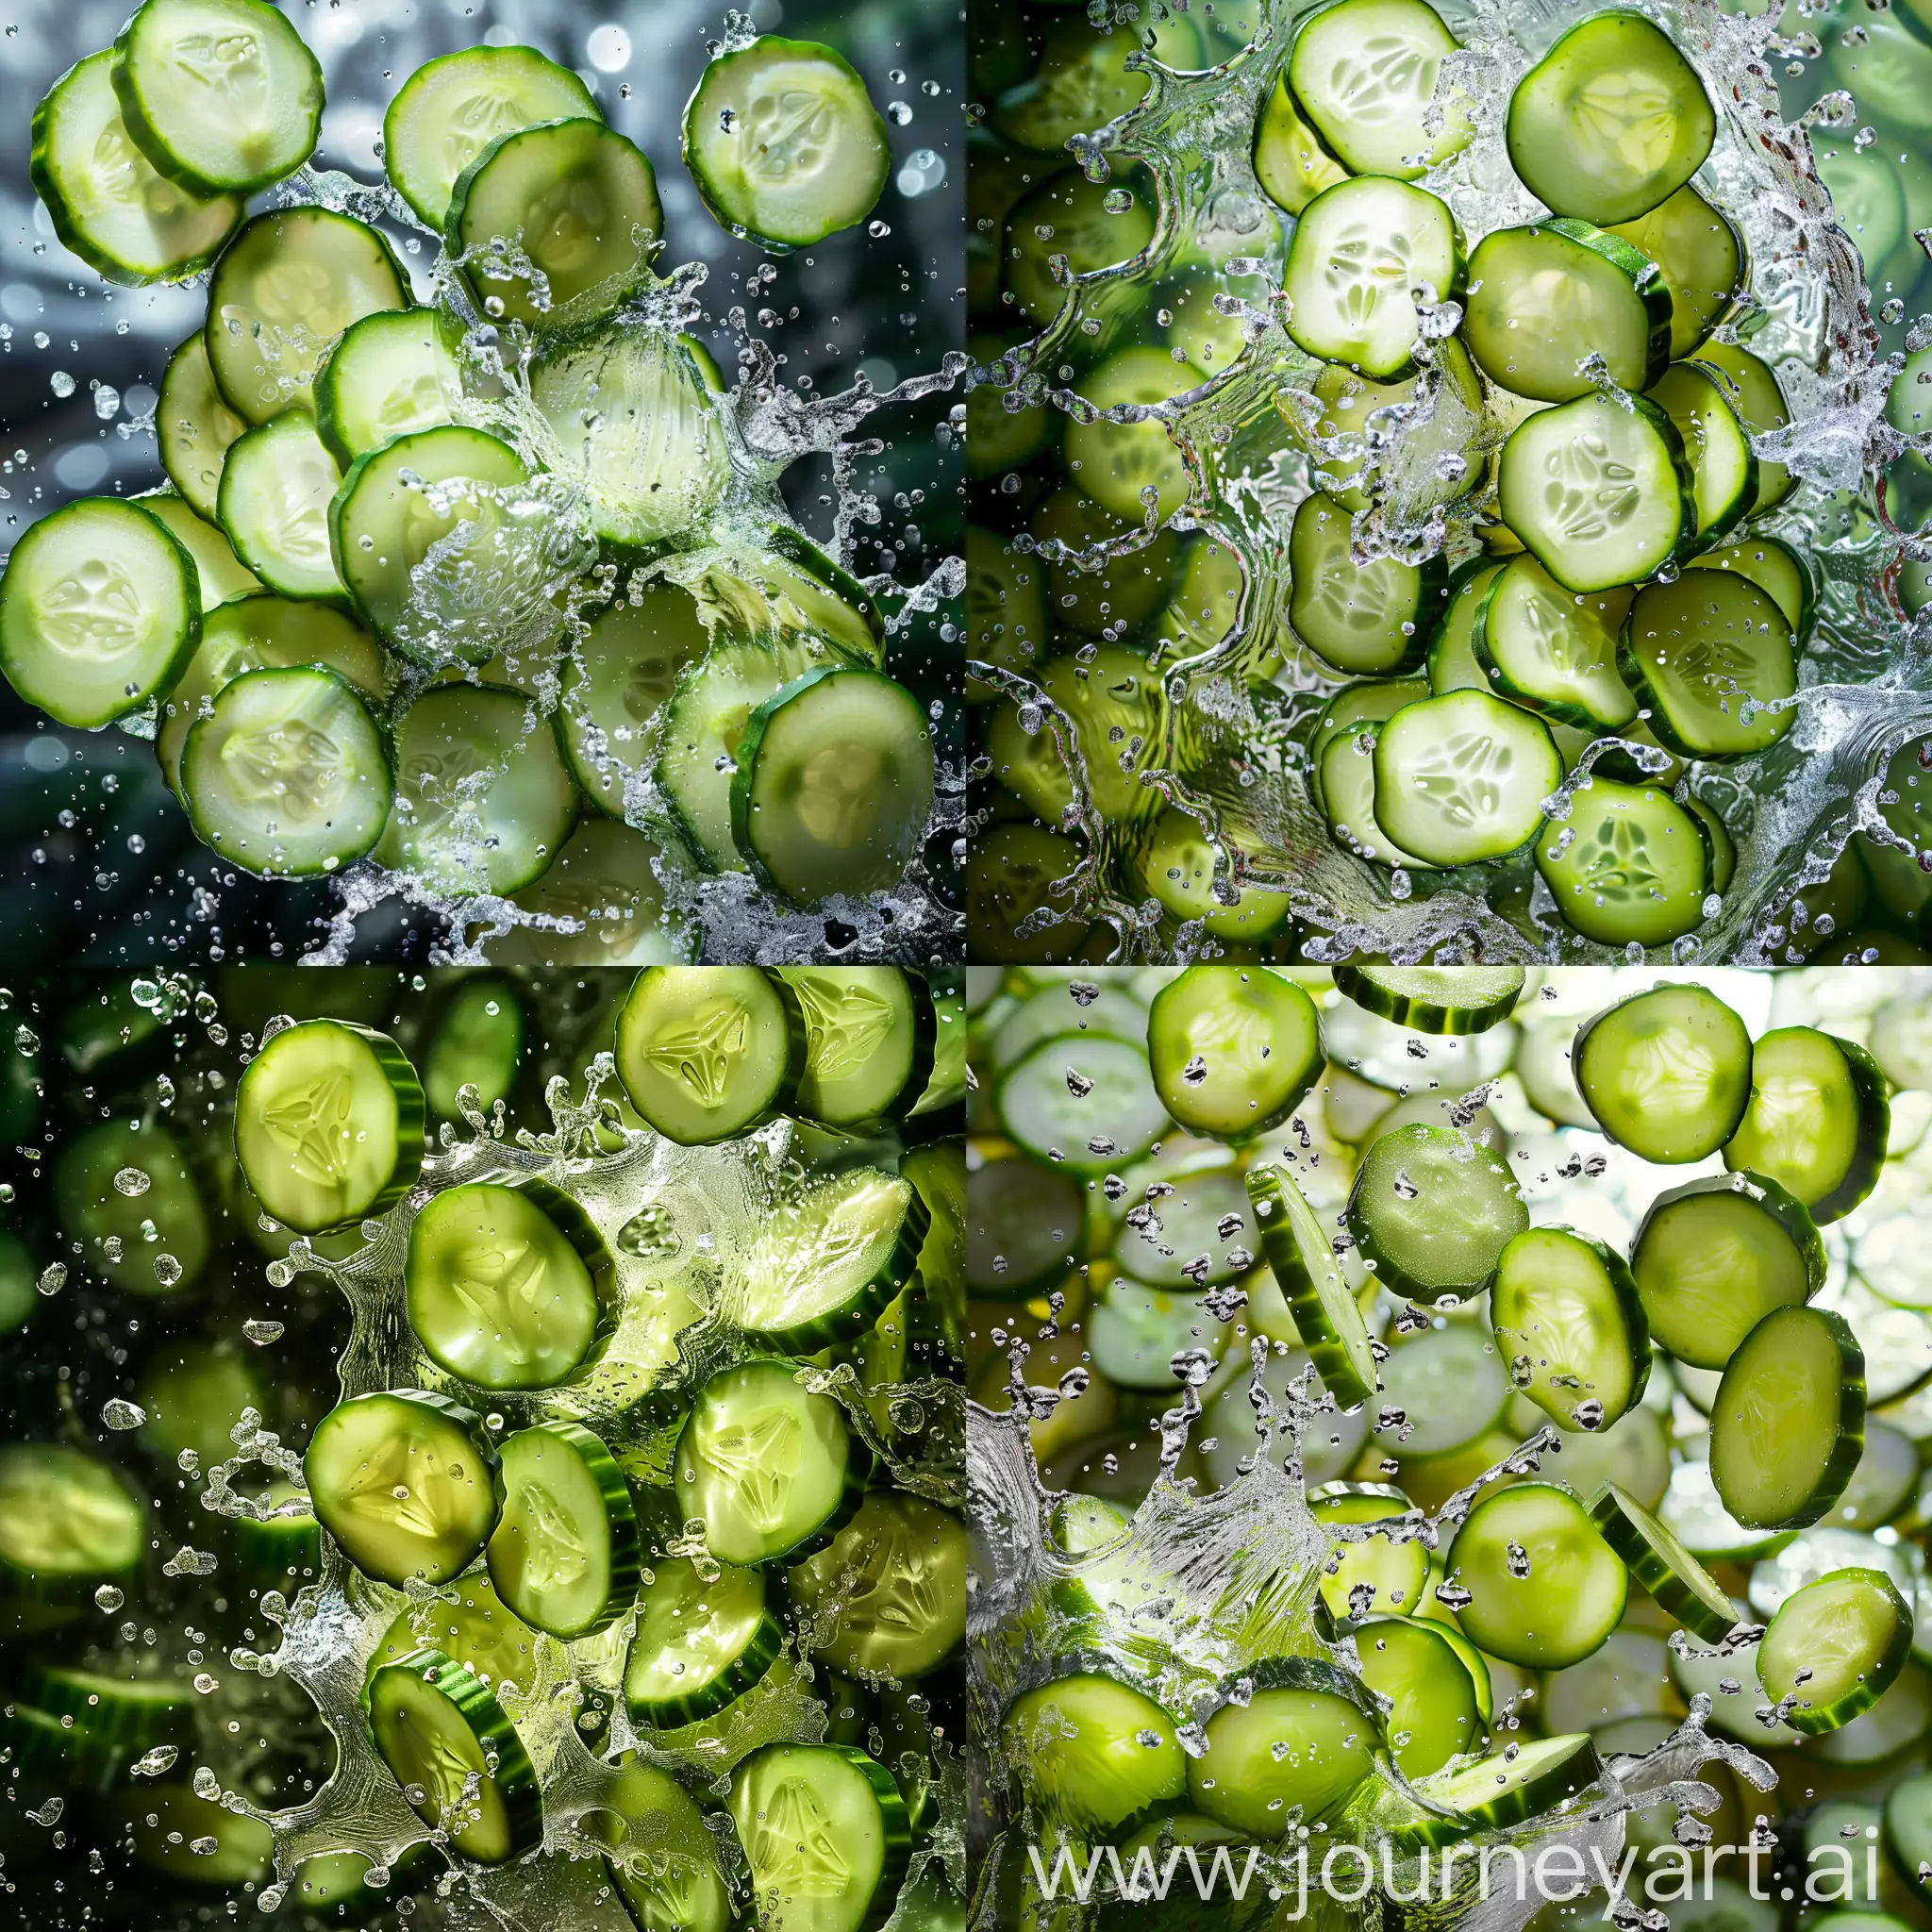 A pile of sliced cucumbers is captured mid-air, with a splash of water around them, suggesting they were just dropped into the liquid. The image has a dynamic feel due to the motion blur and splashes.